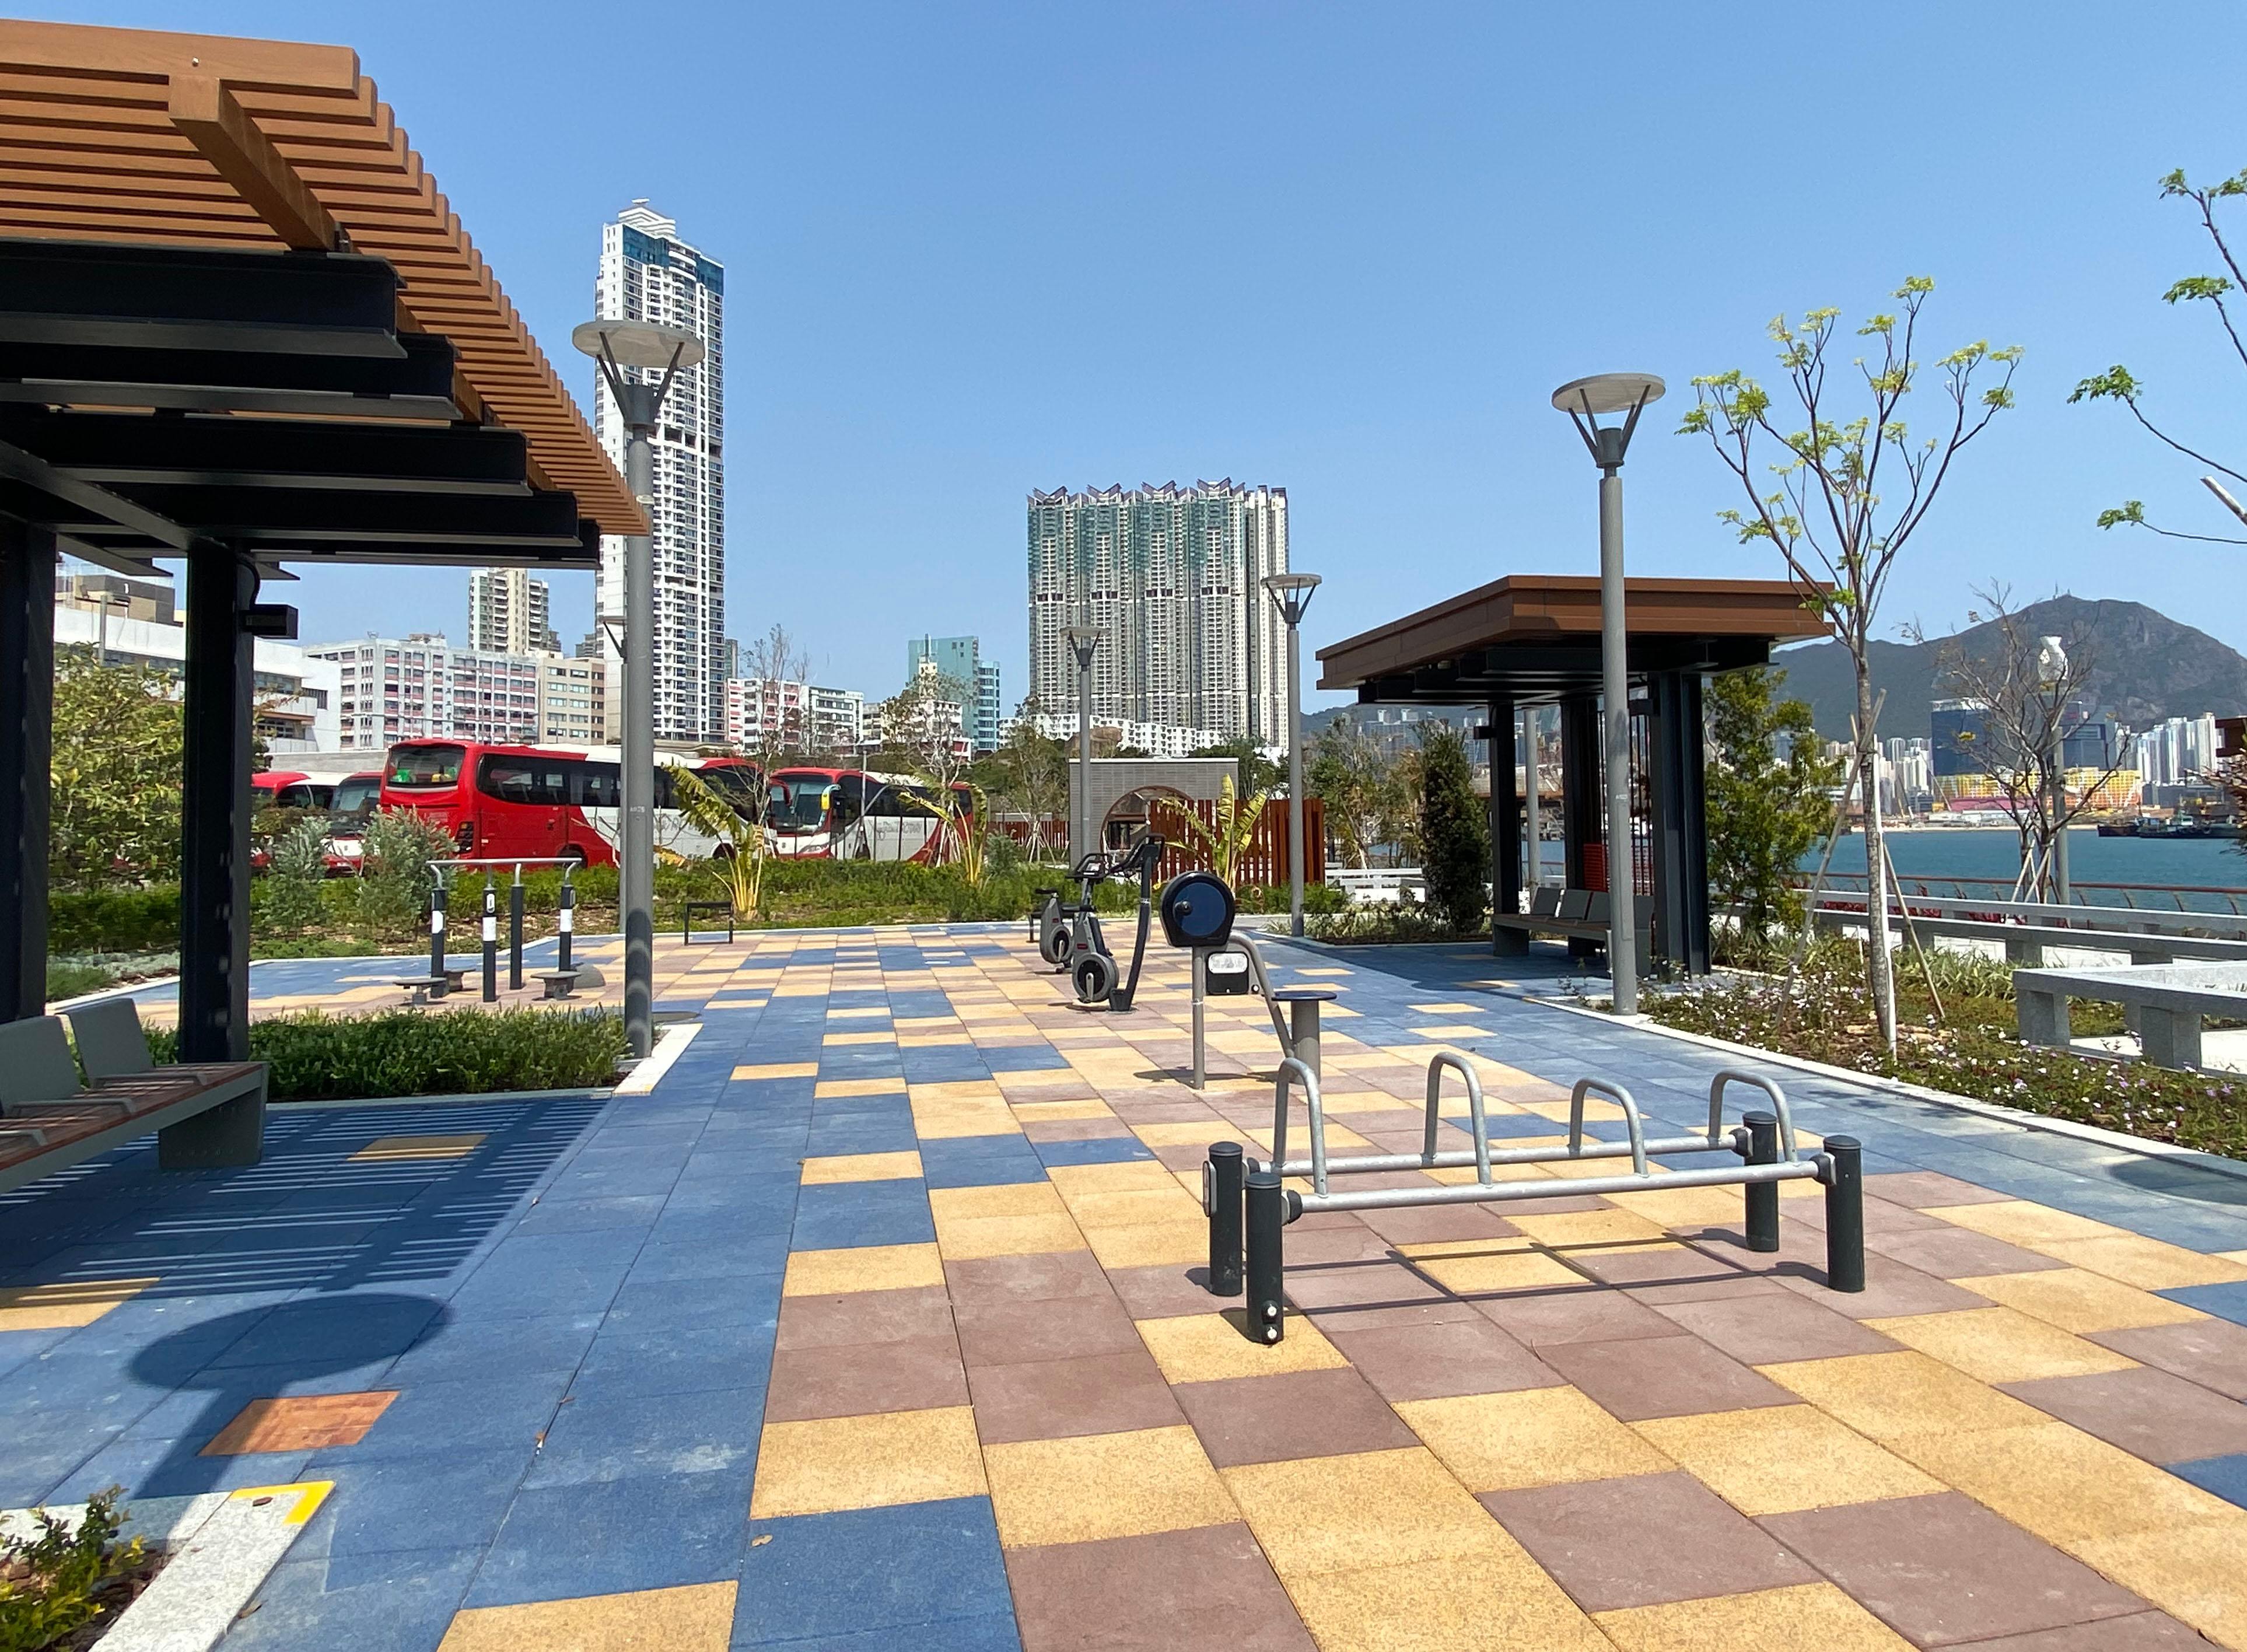 The Leisure and Cultural Services Department announced today (March 31) that the newly built Hoi Sham Park extension in Kowloon City District will open for public use from next Monday (April 3). Located at To Kwa Wan near the harbour side, it will be a pleasant and relaxing leisure space with a spectacular promenade for public enjoyment.